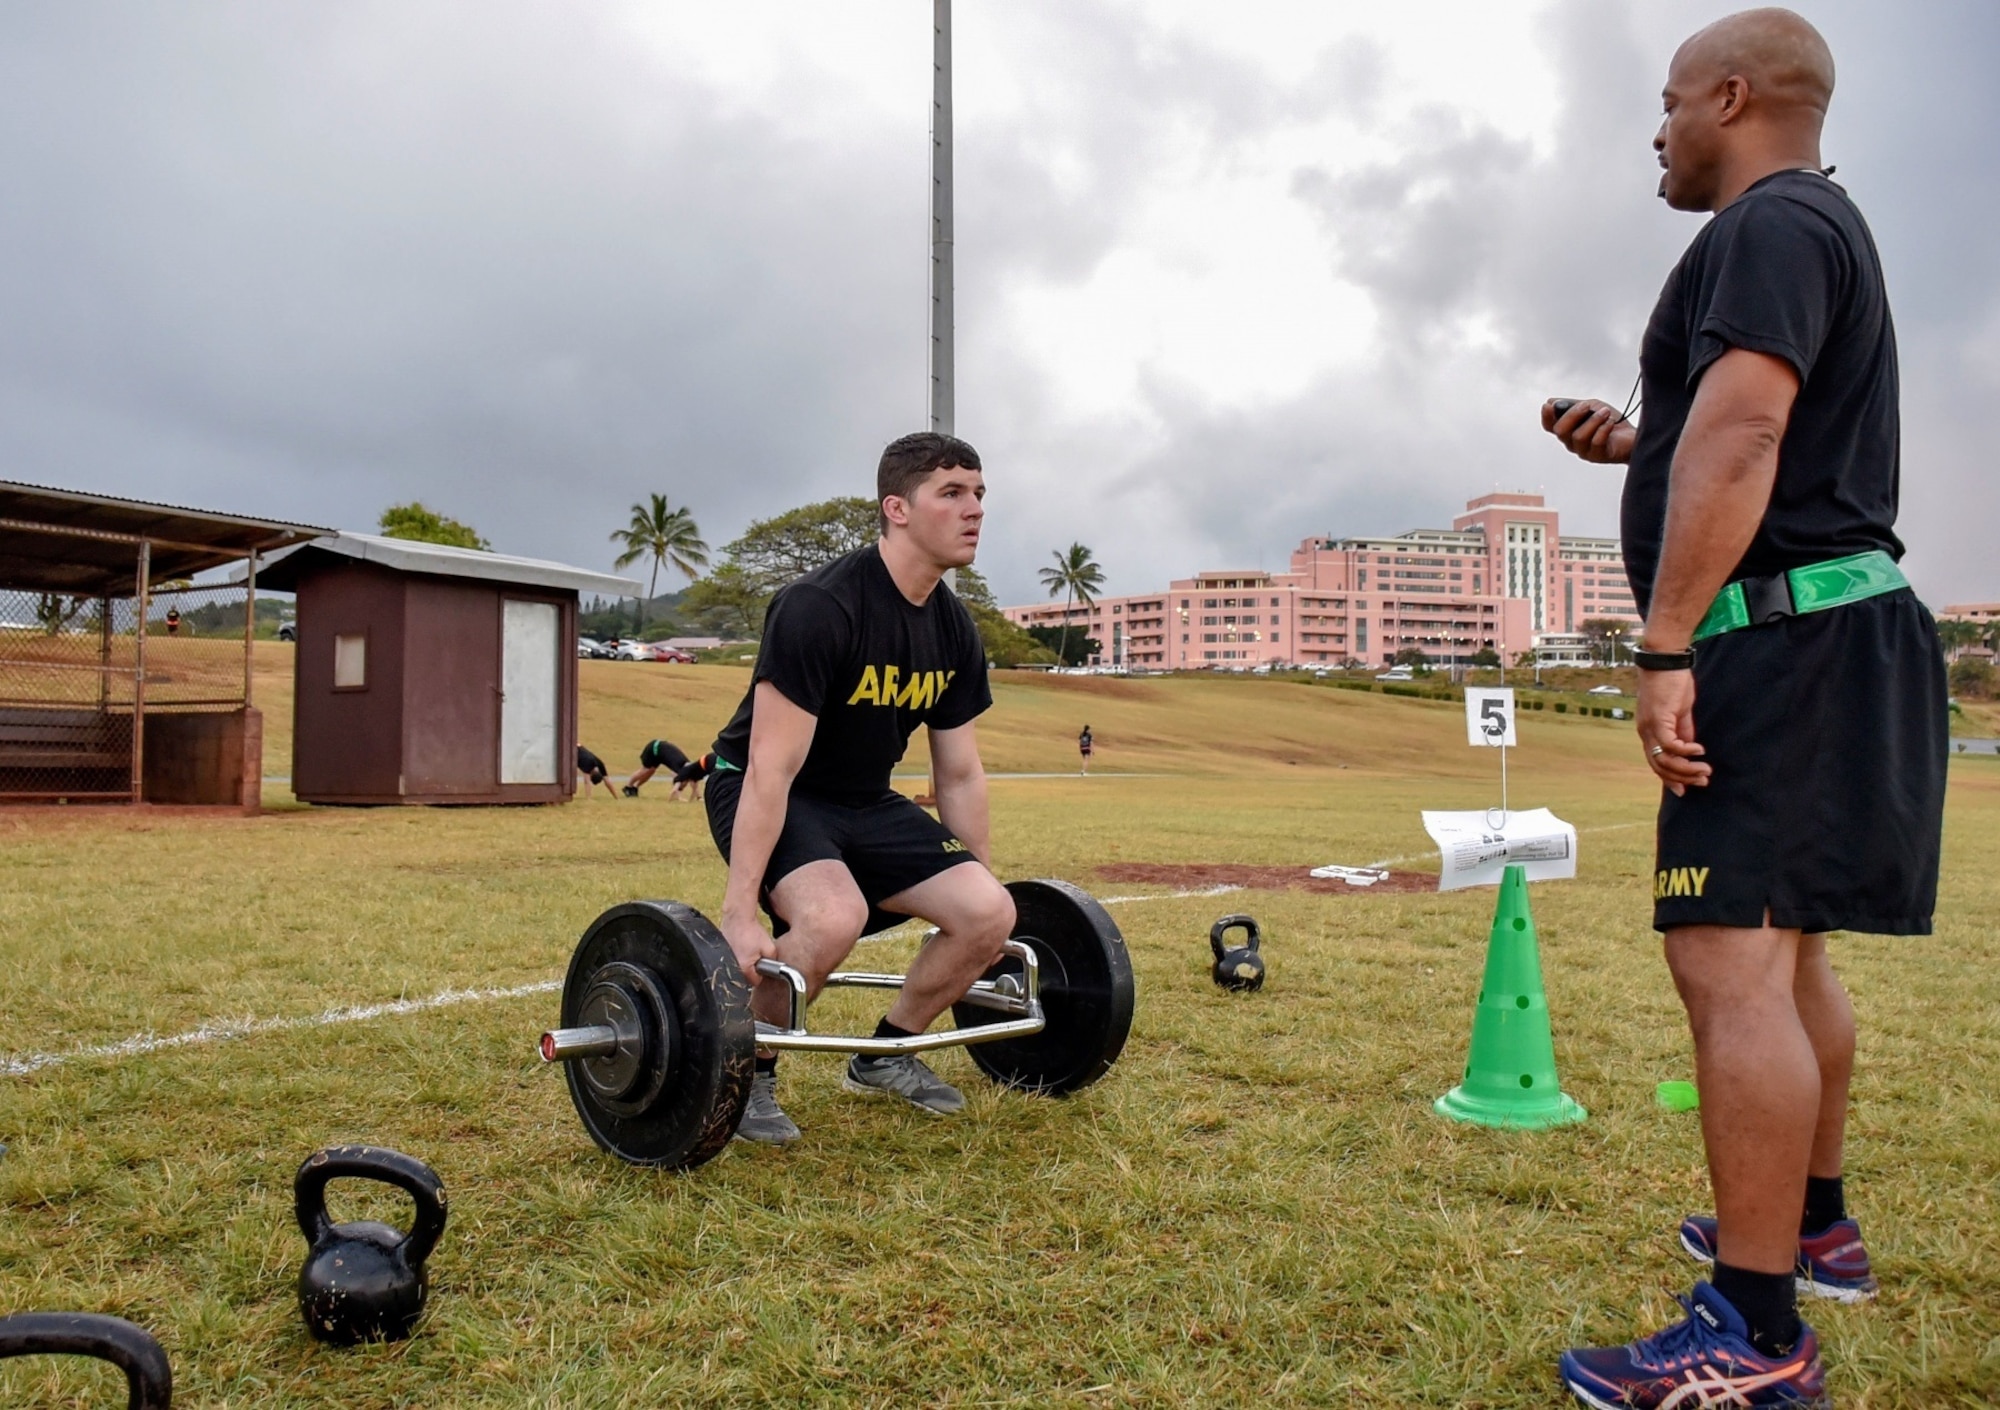 Sgt. 1st Class Jarrod Vining (right), noncommissioned officer in charge, Department of Physical Medicine & Rehabilitation, Tripler Army Medical Center, coaches Sgt. Dominic Falzarano, left, cash control NCOIC, TAMC Nutrition Care Department, during a Spartan Army Combat Physical Training course at the TAMC track in Honolulu April 17.